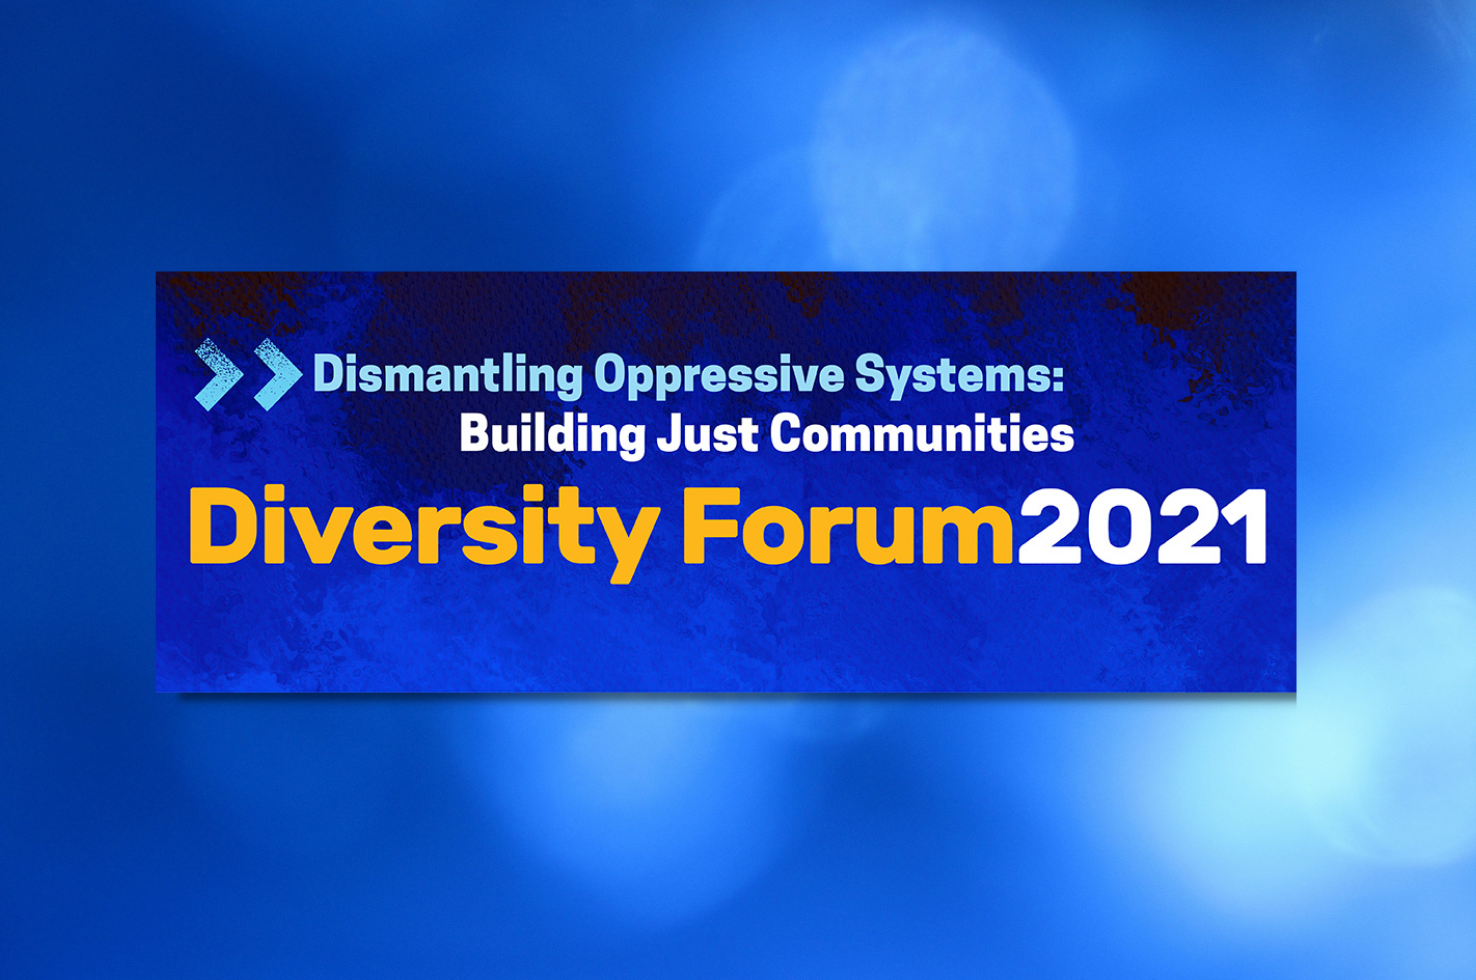 Reflections from the University of Pittsburgh Diversity Forum 2021